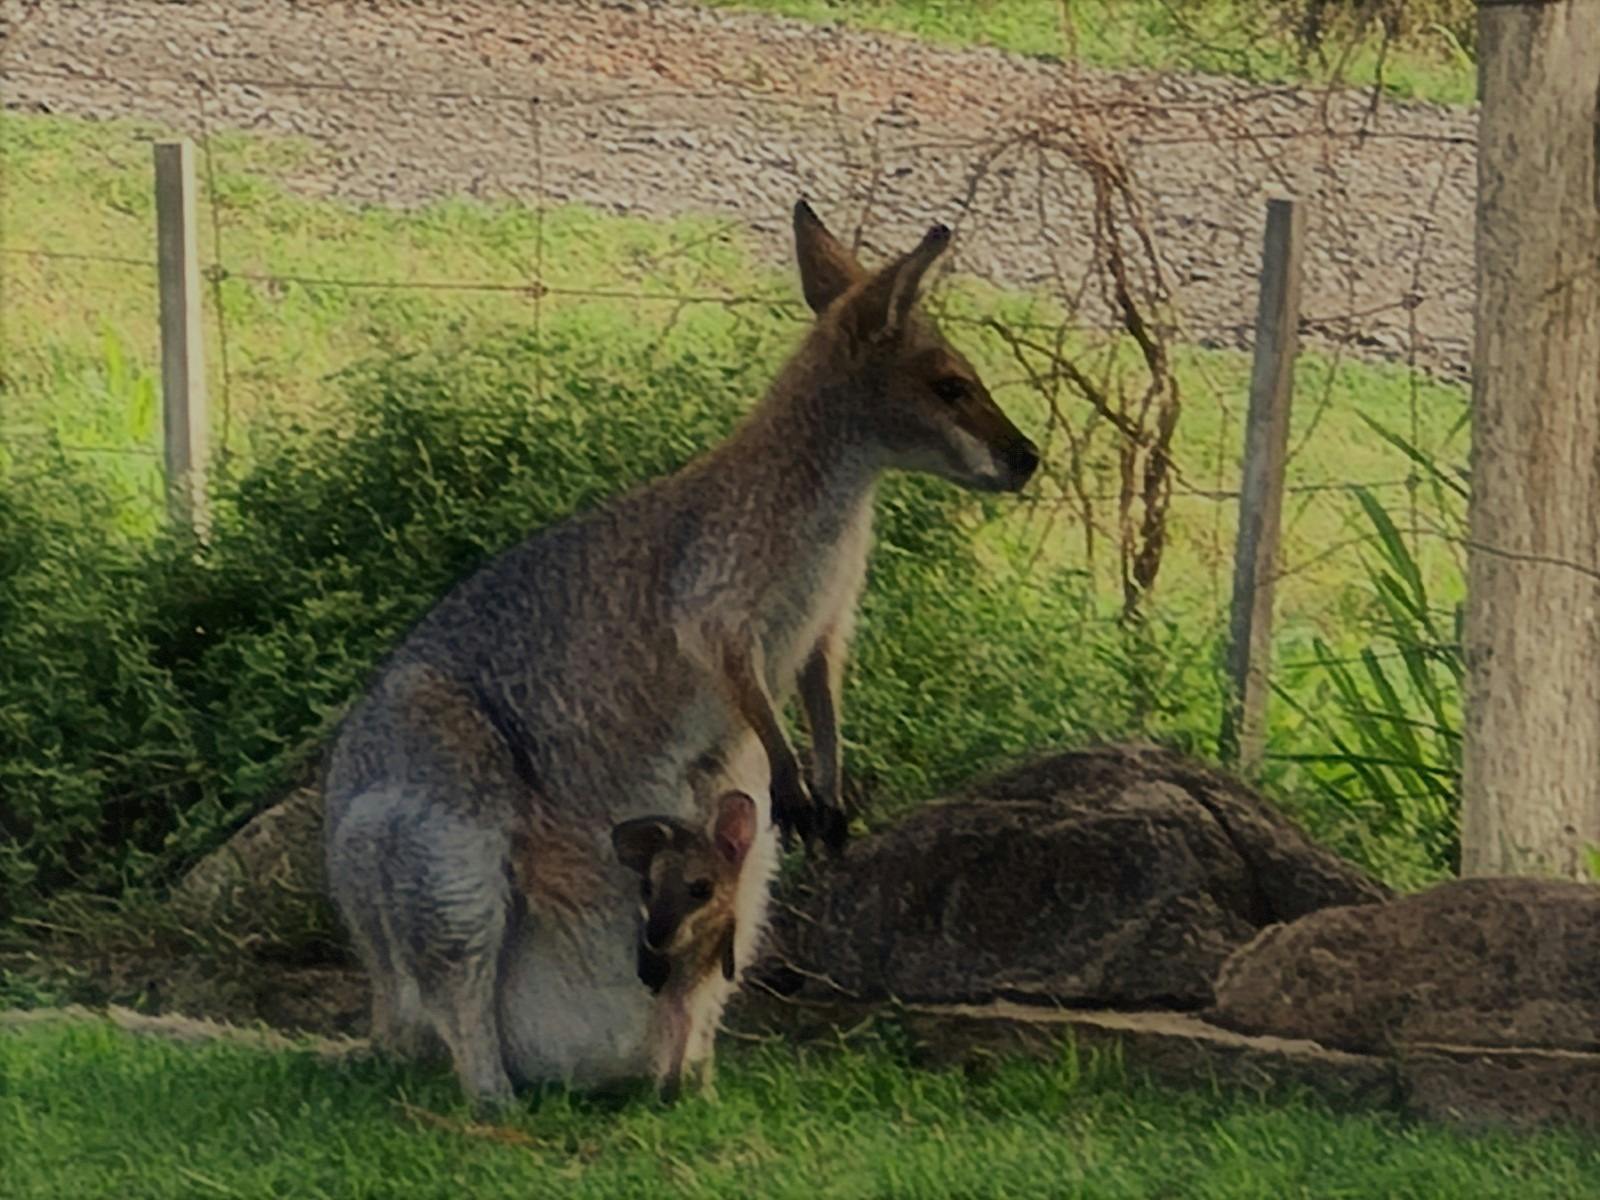 Joey in pouch visiting Gumnut Cottage - abundant fauna and Flora in Land For Wildlife